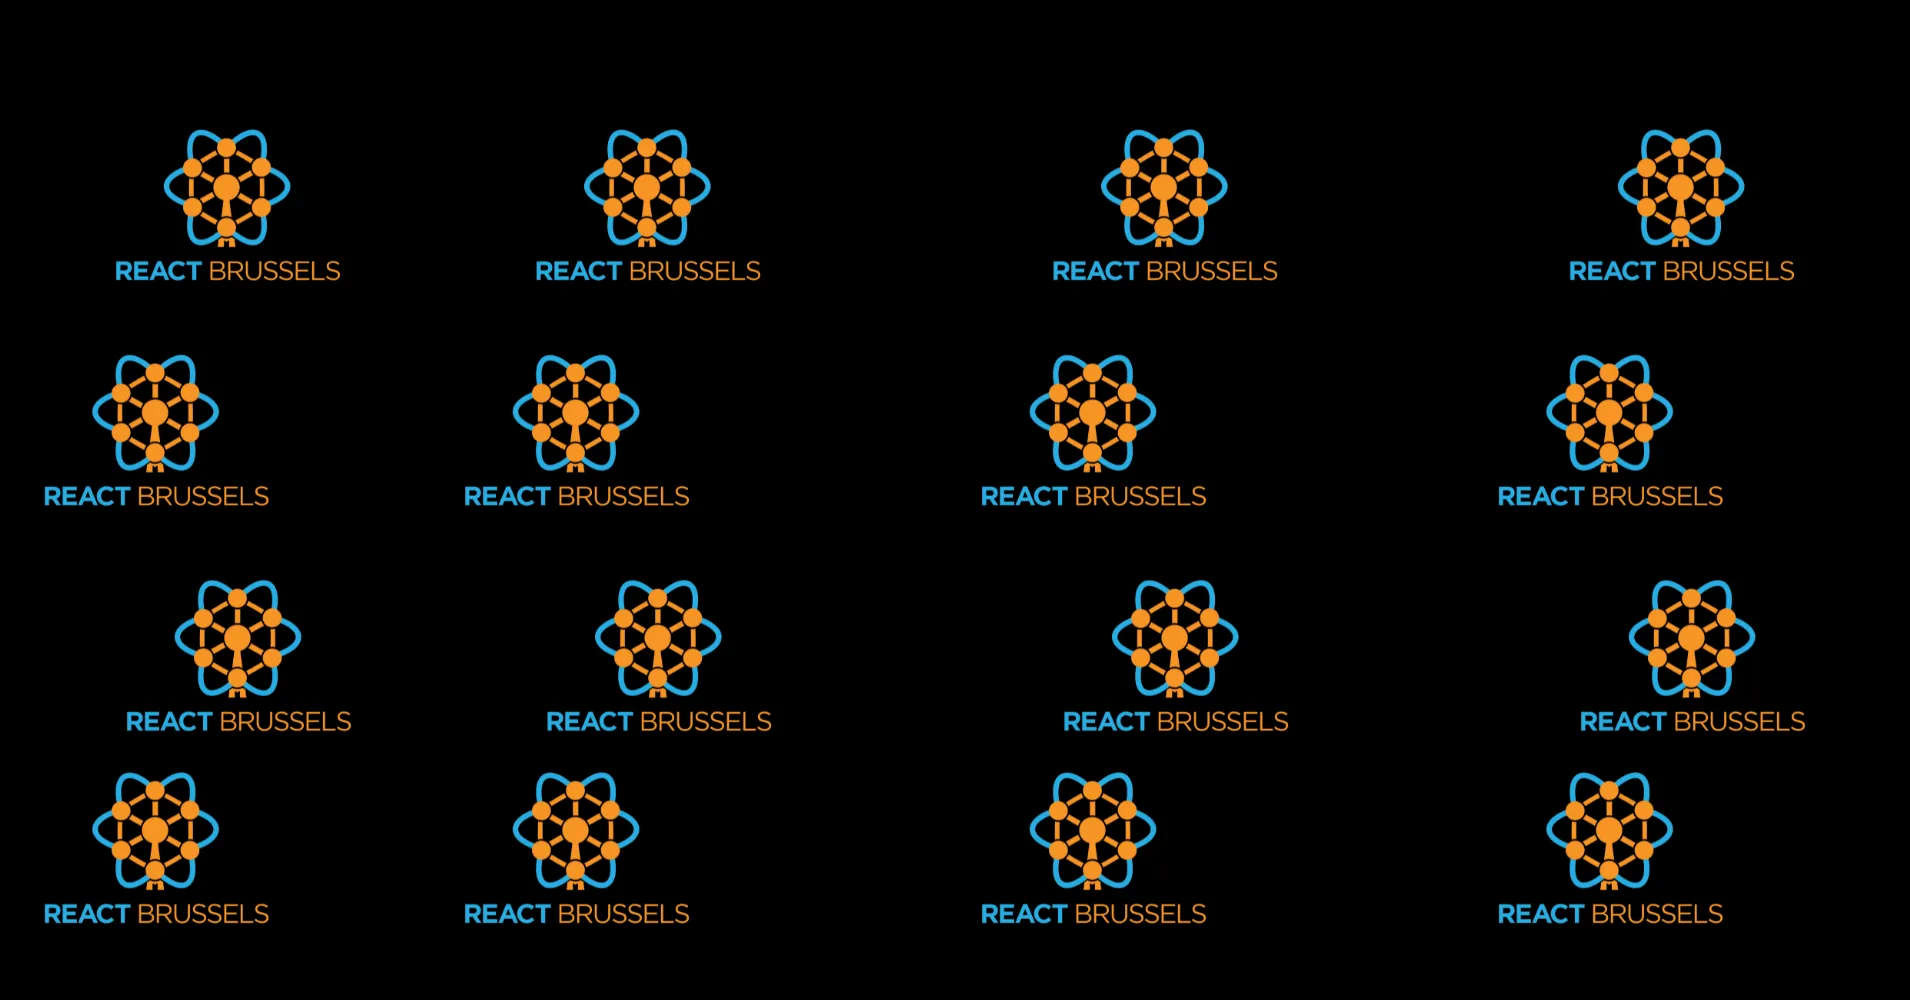 React Brussels logo repeated